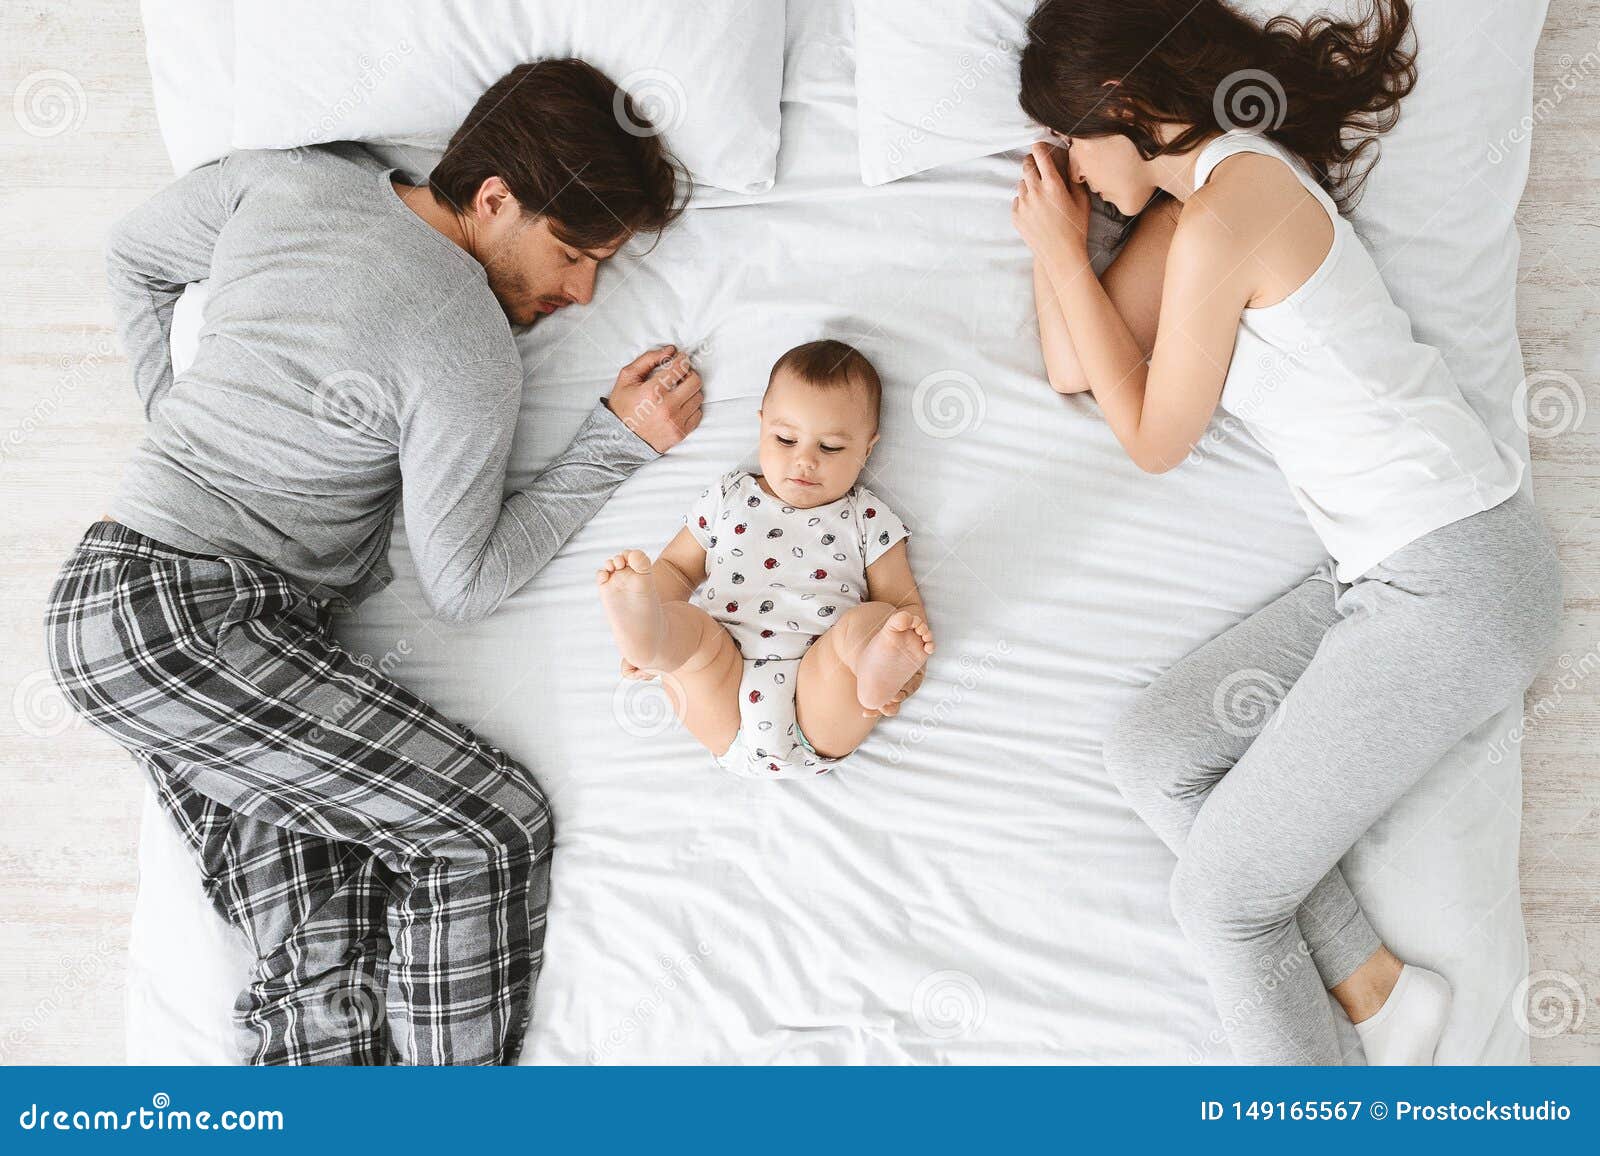 Tired Parents Sleeping on Bed Sides, Baby Playing in the Middle Stock